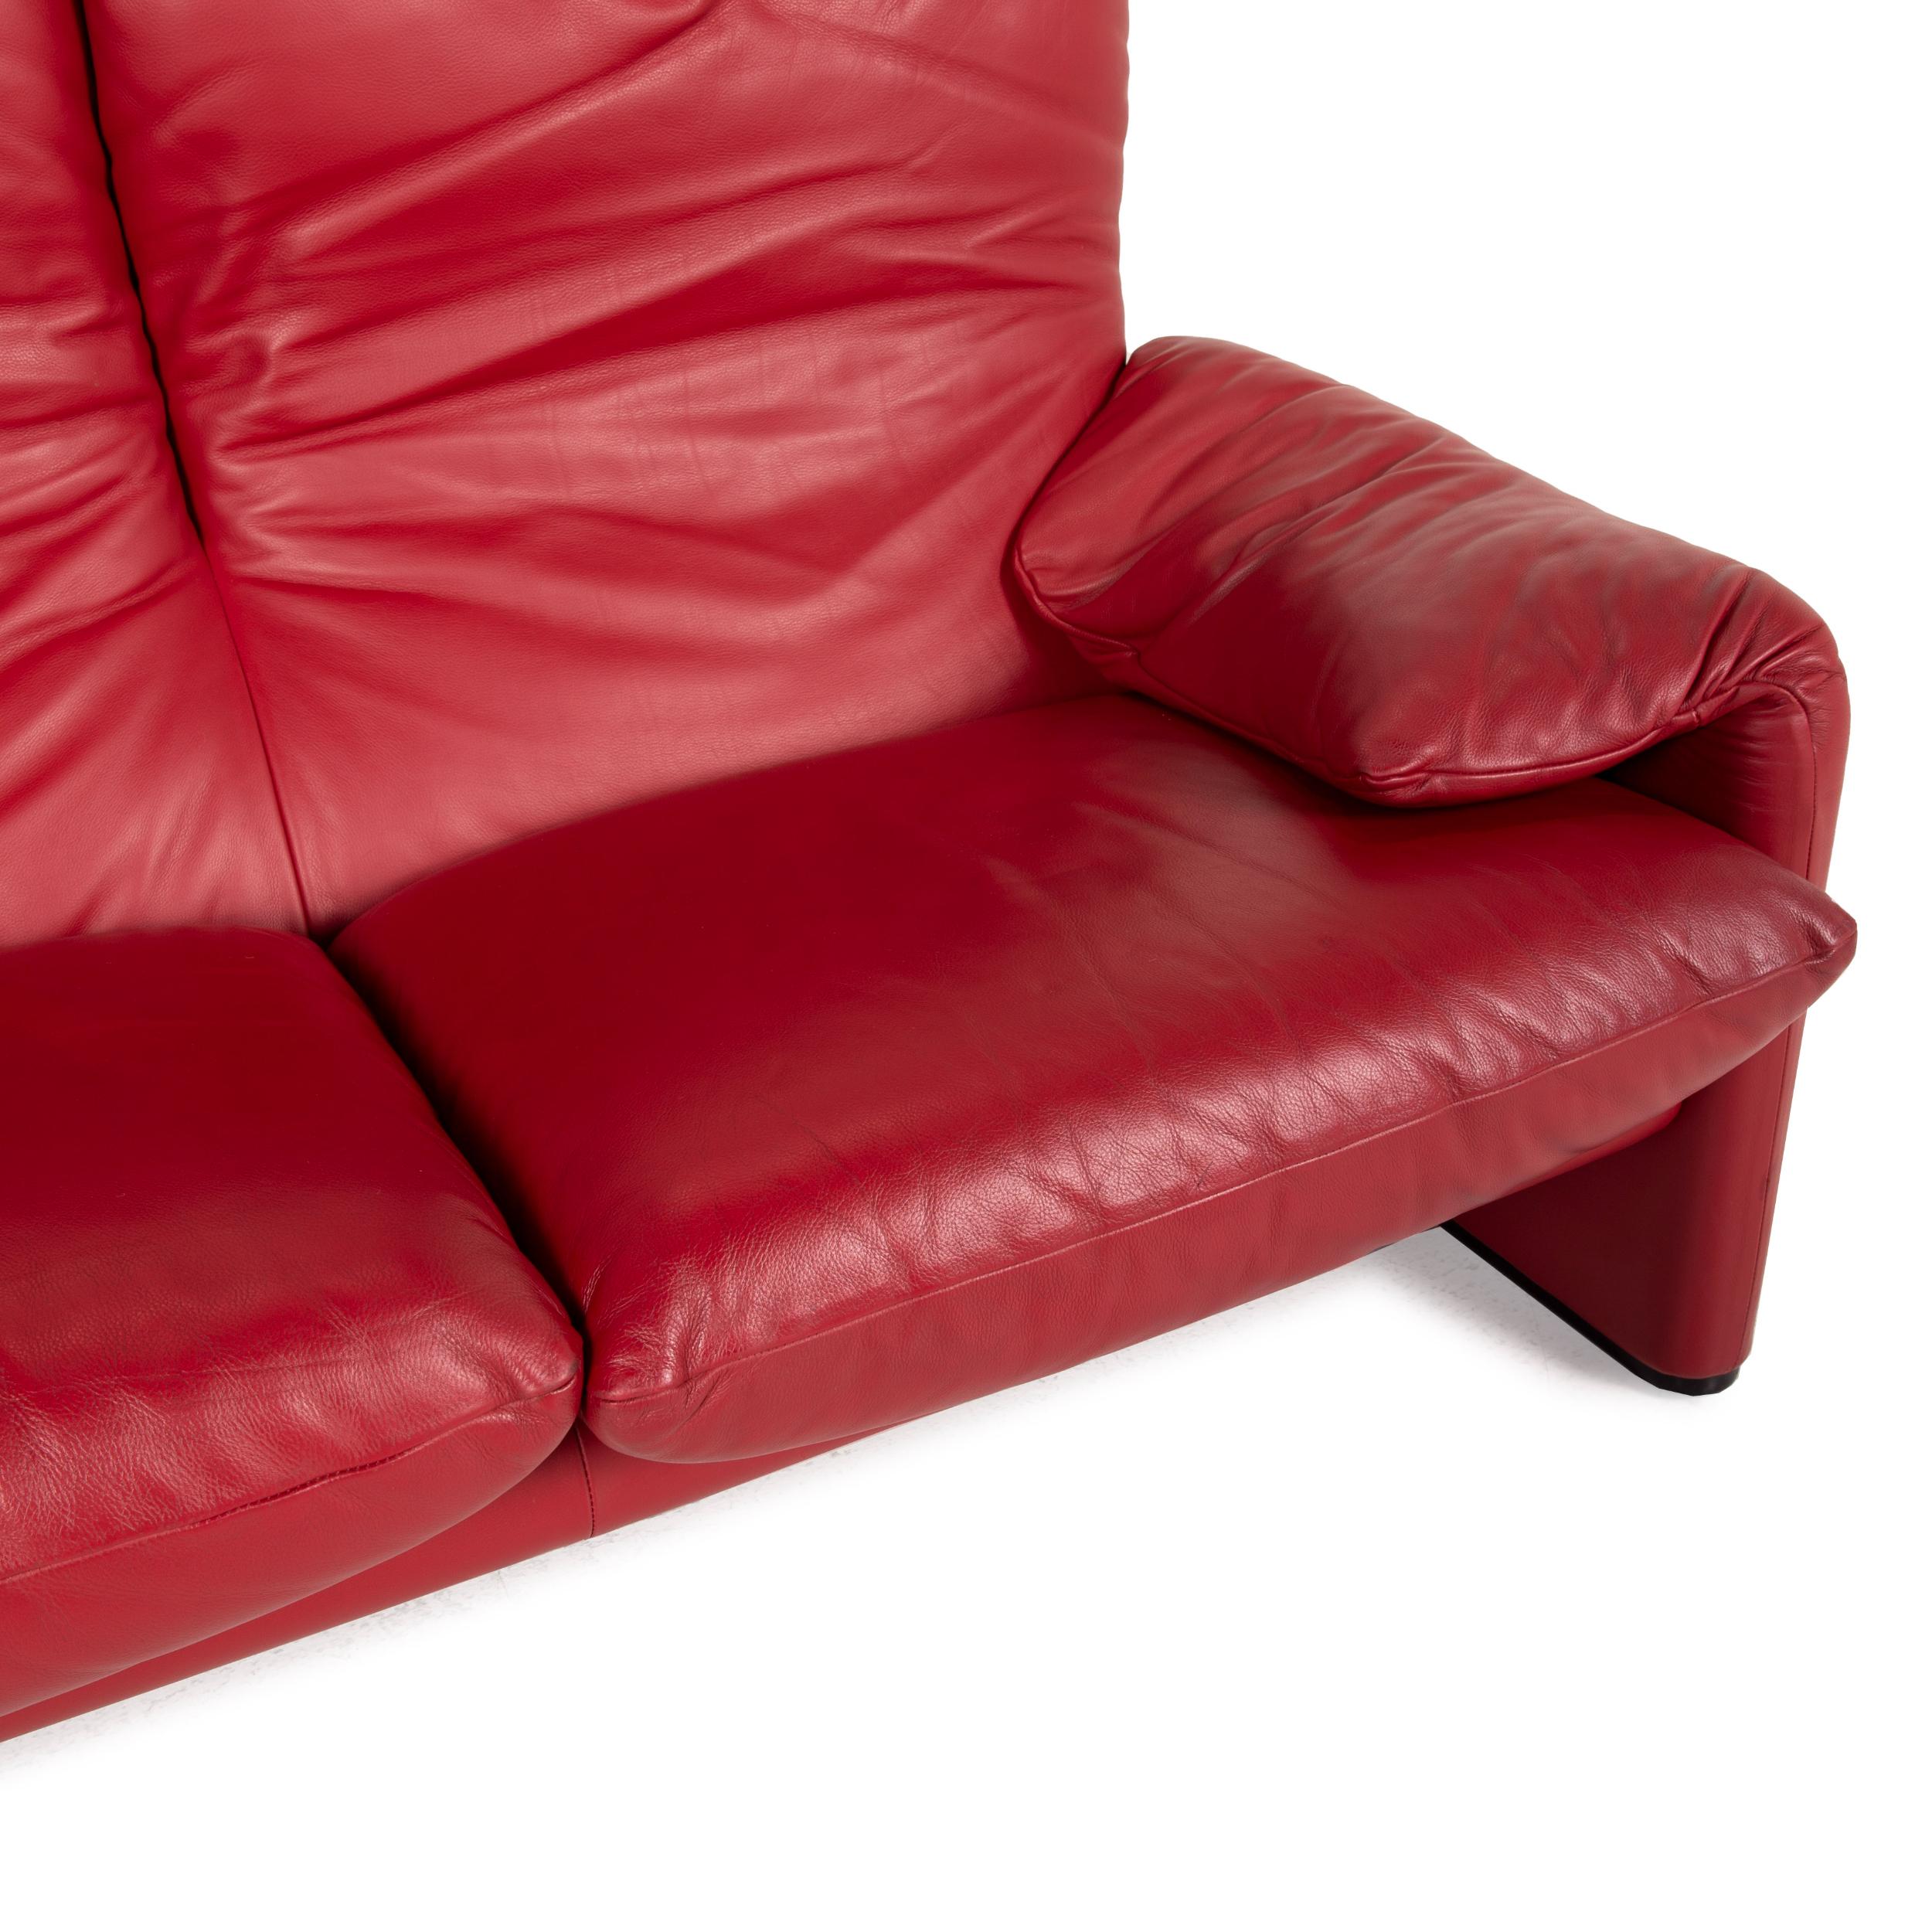 Modern Cassina Maralunga Designer Leather Sofa Red Two-Seater Couch Function